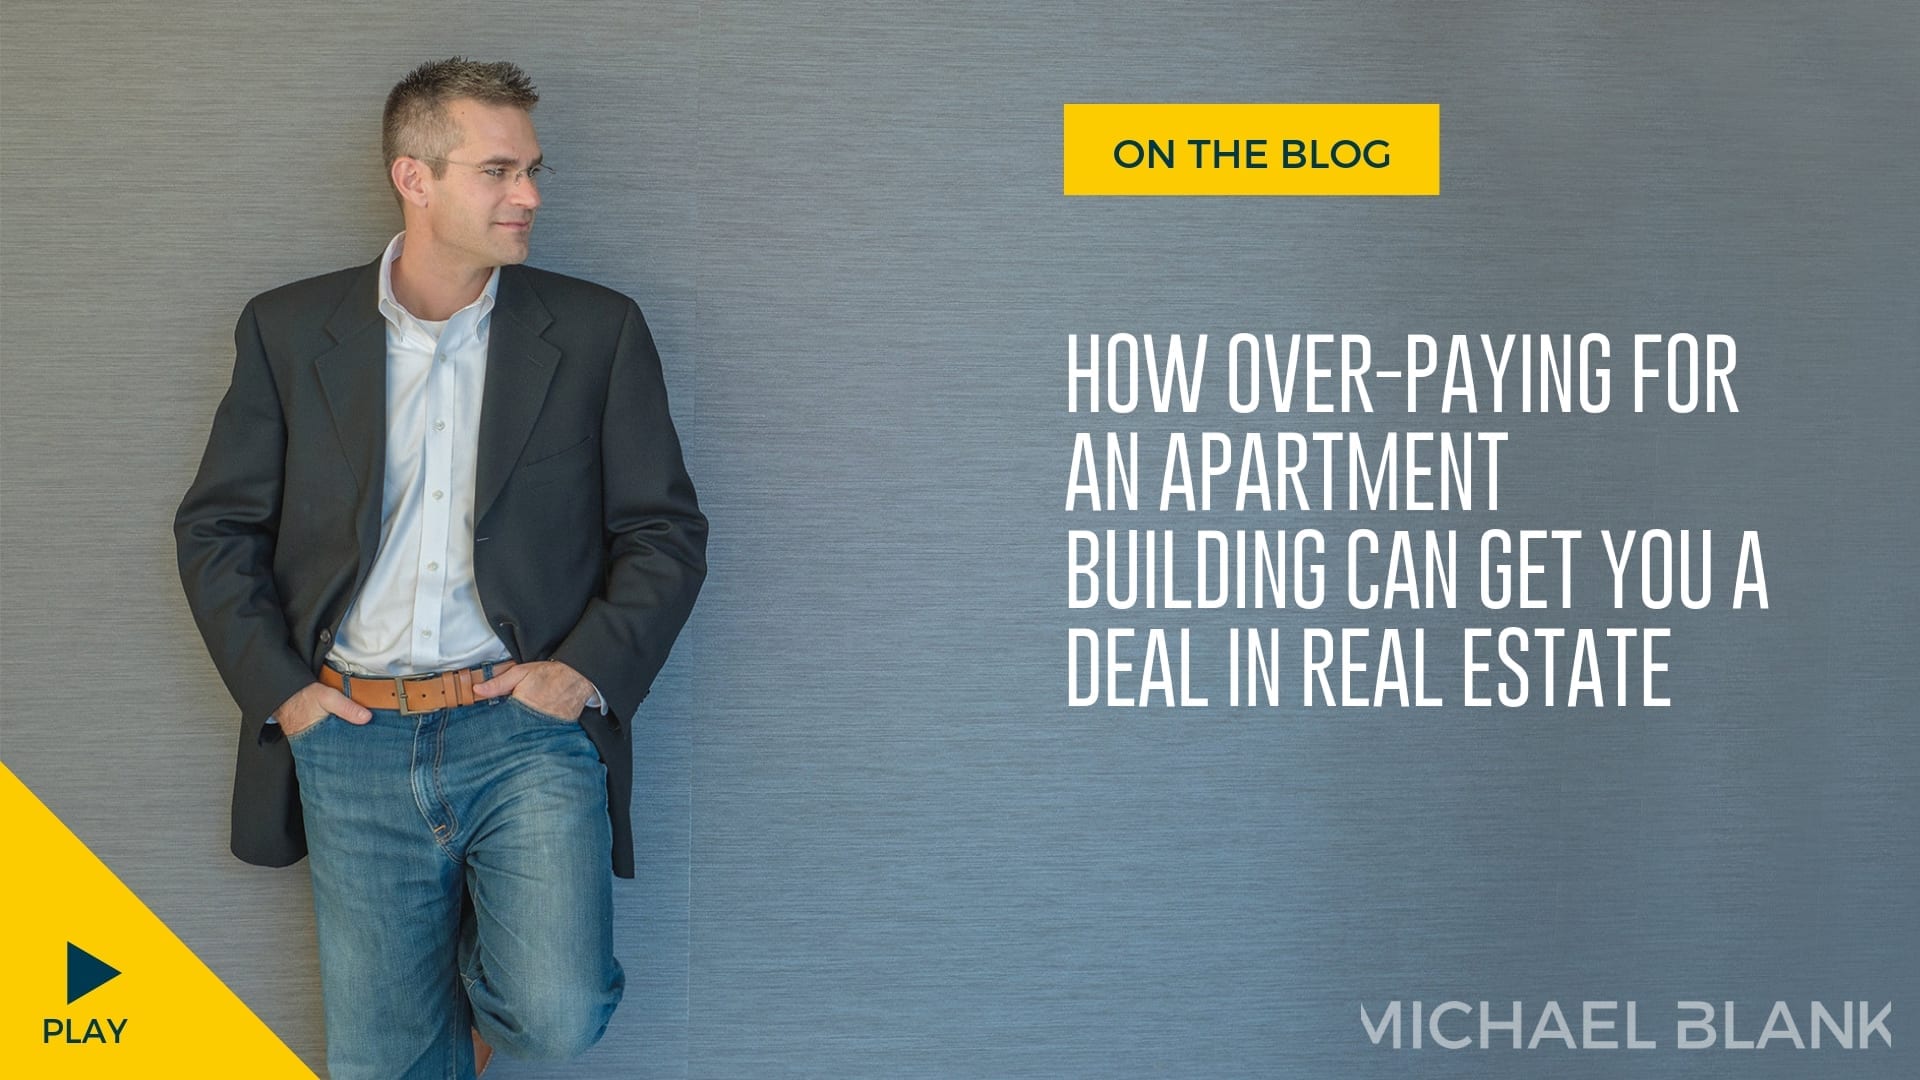 How Over-Paying For An Apartment Building Can Get You A Deal In Real Estate